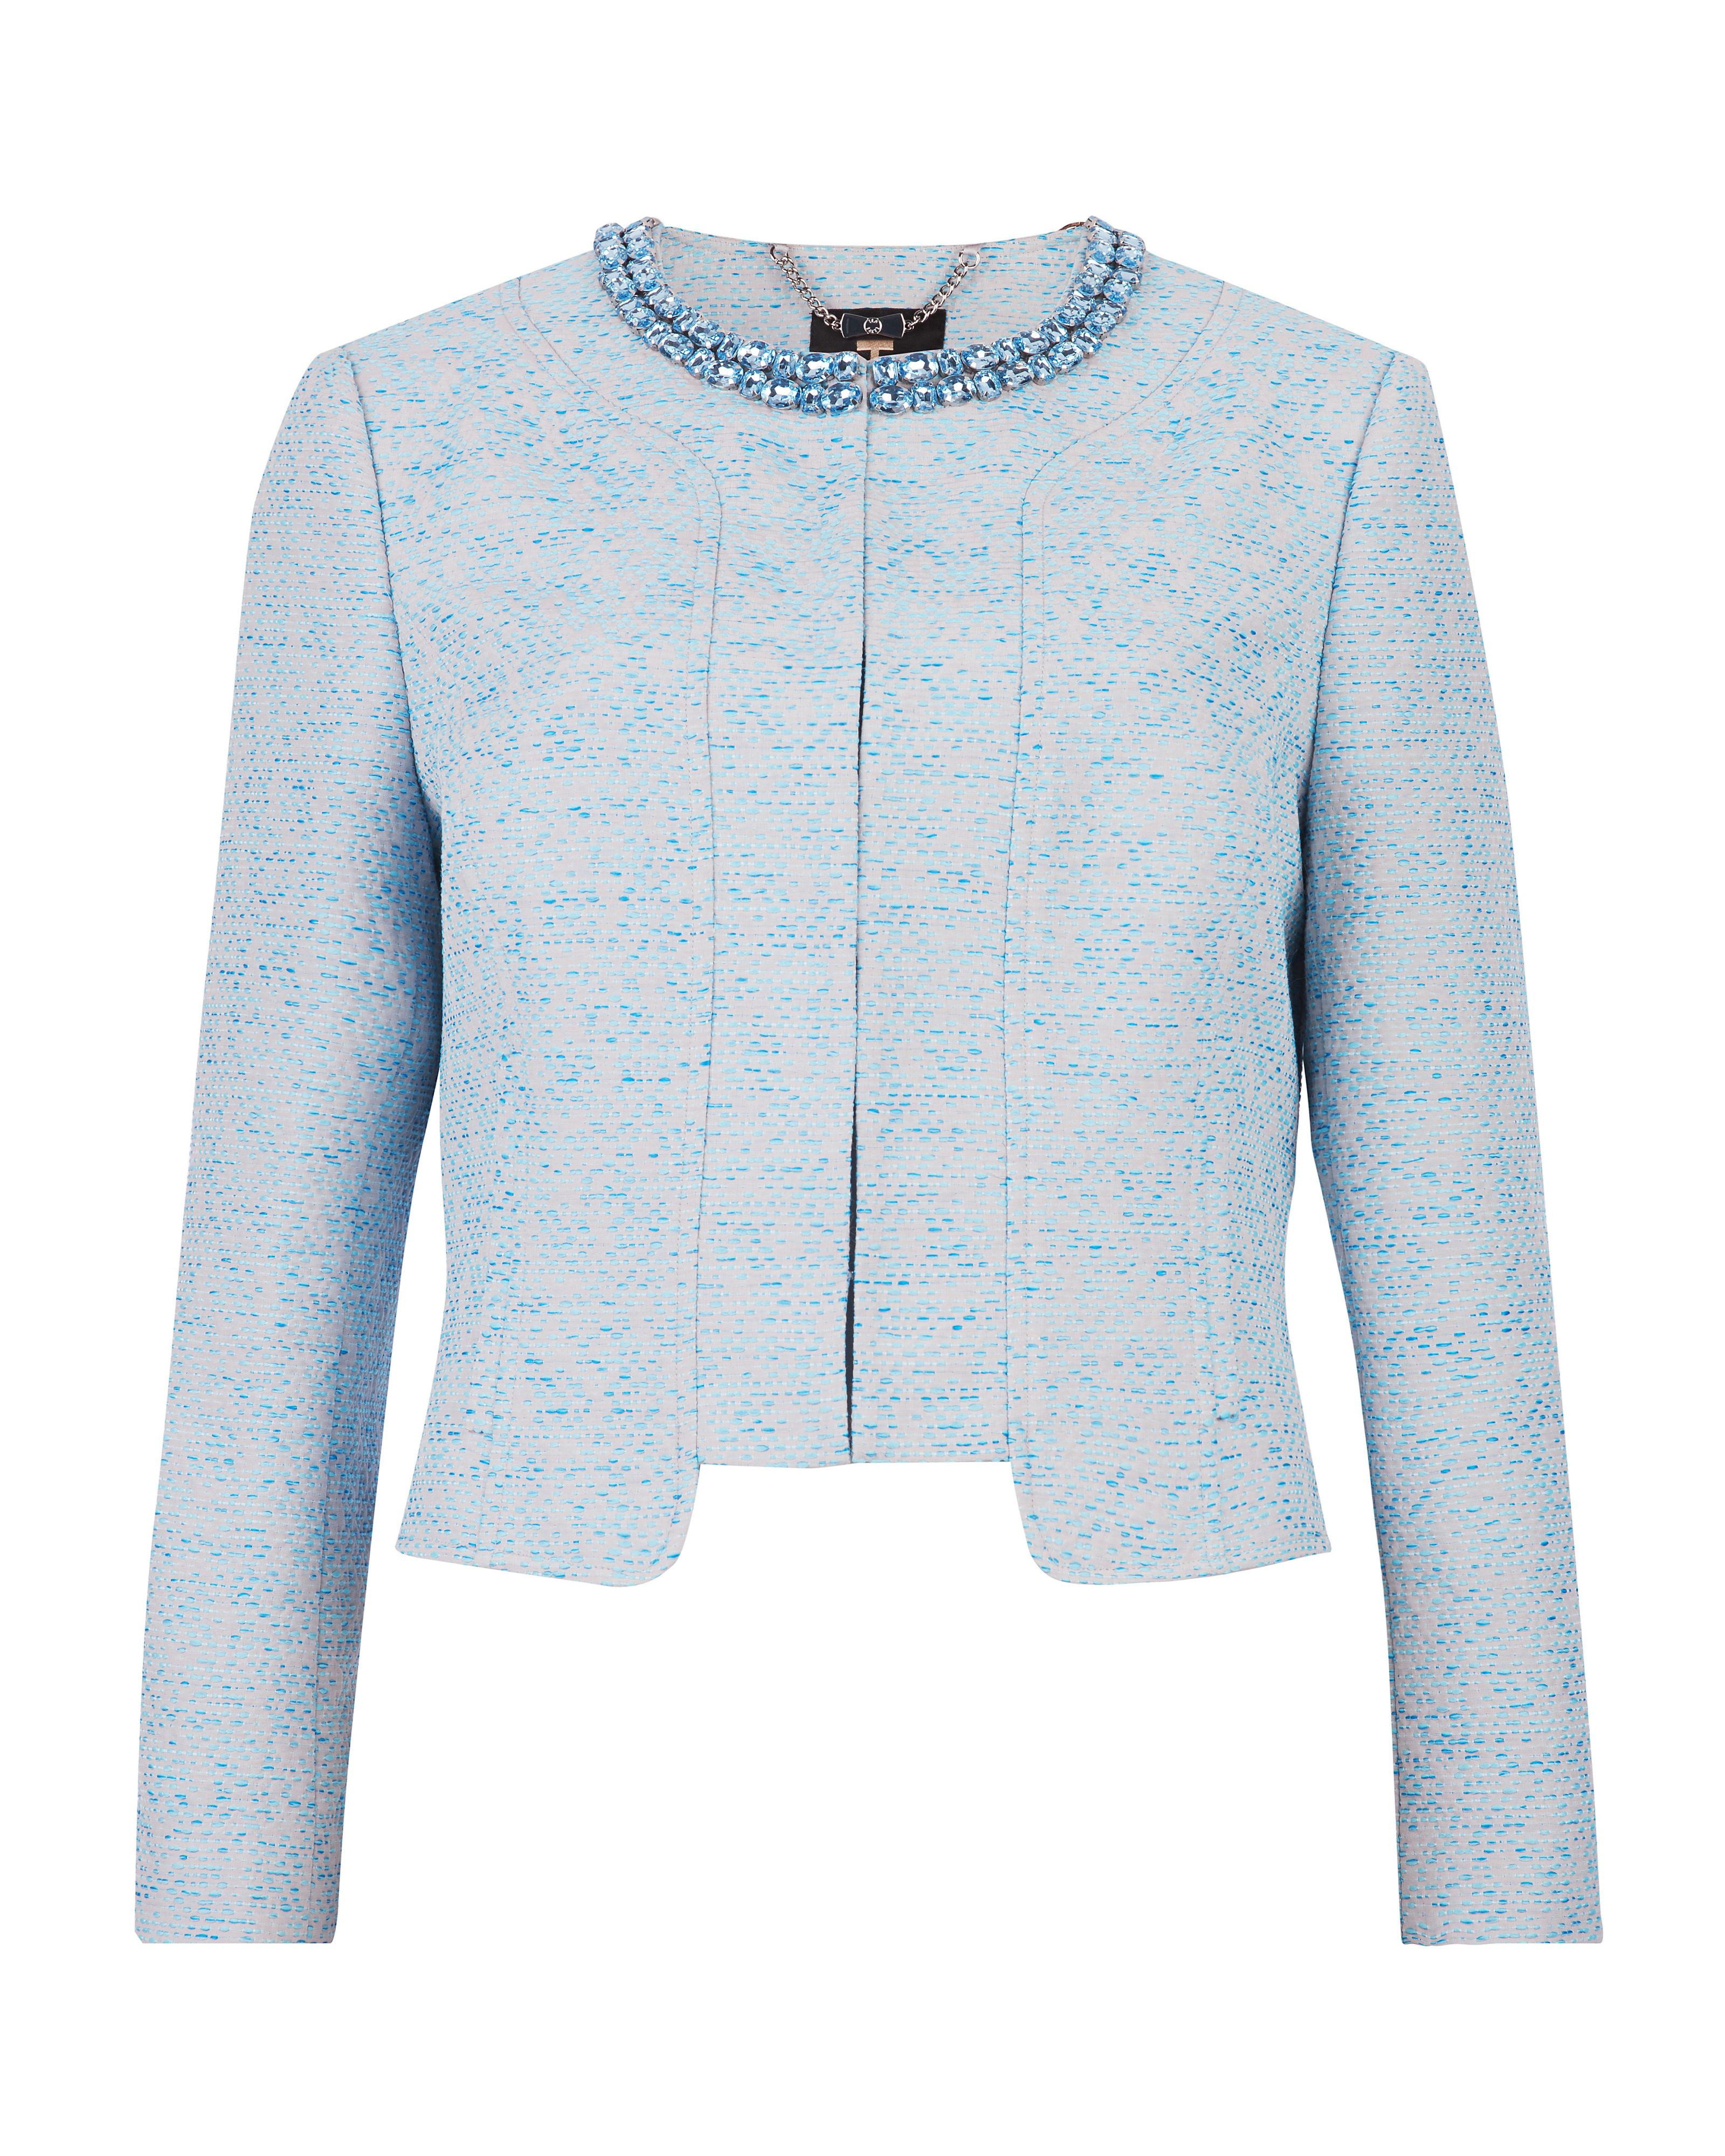 Lyst - Ted Baker Abina Crystal Collar Jacket in Blue